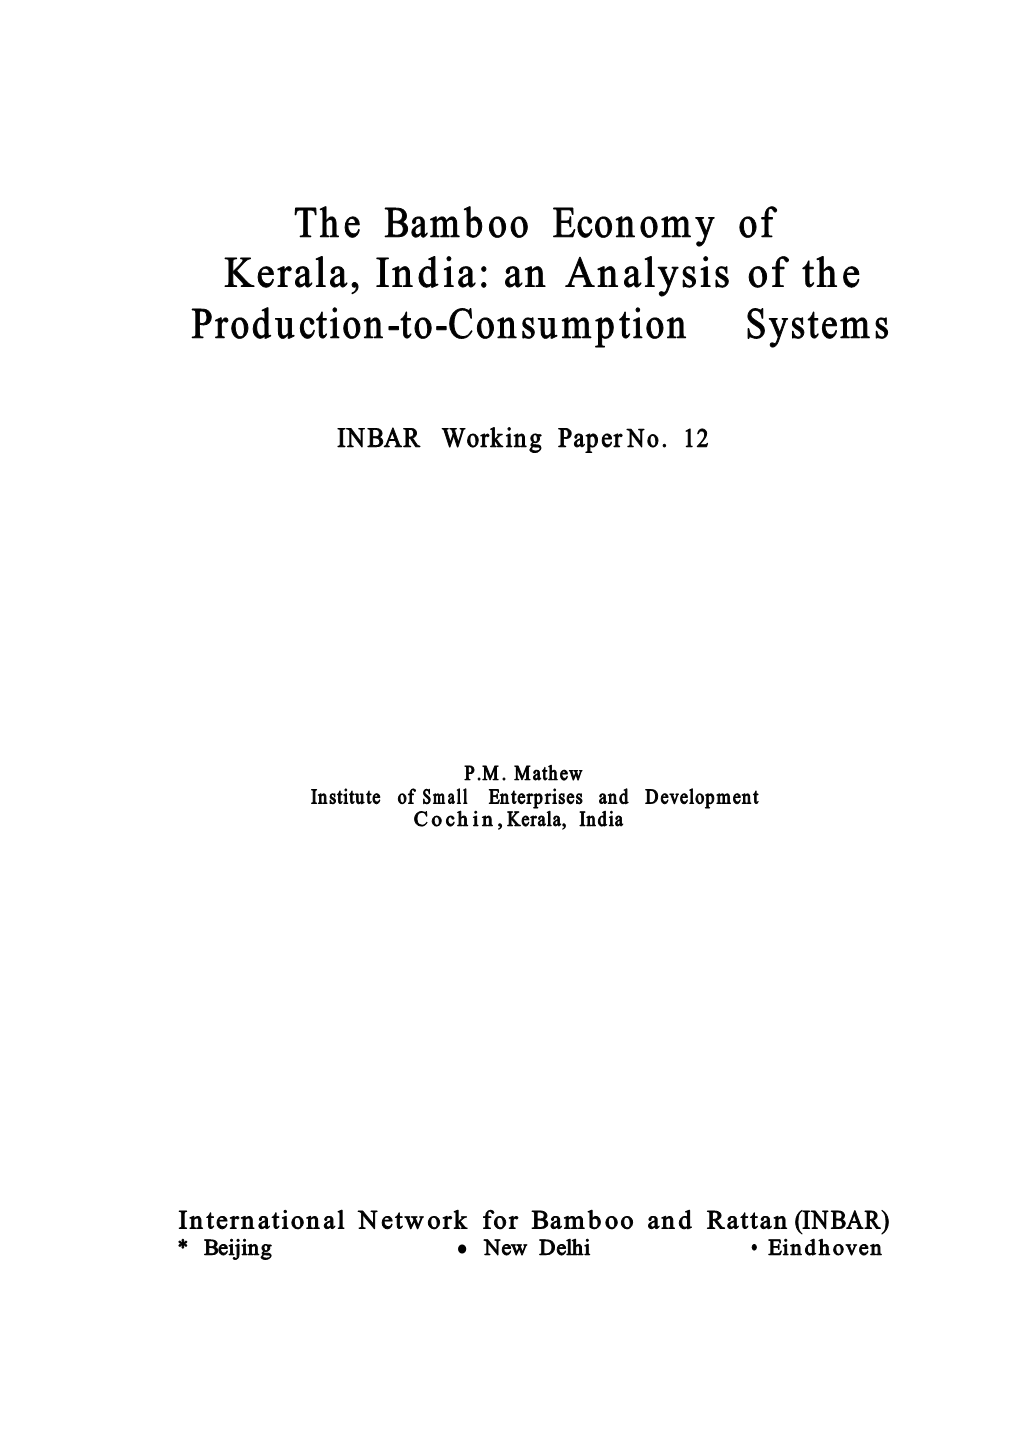 The Bamboo Economy of Kerala, India: an Analysis of the Production-To-Consumption Systems